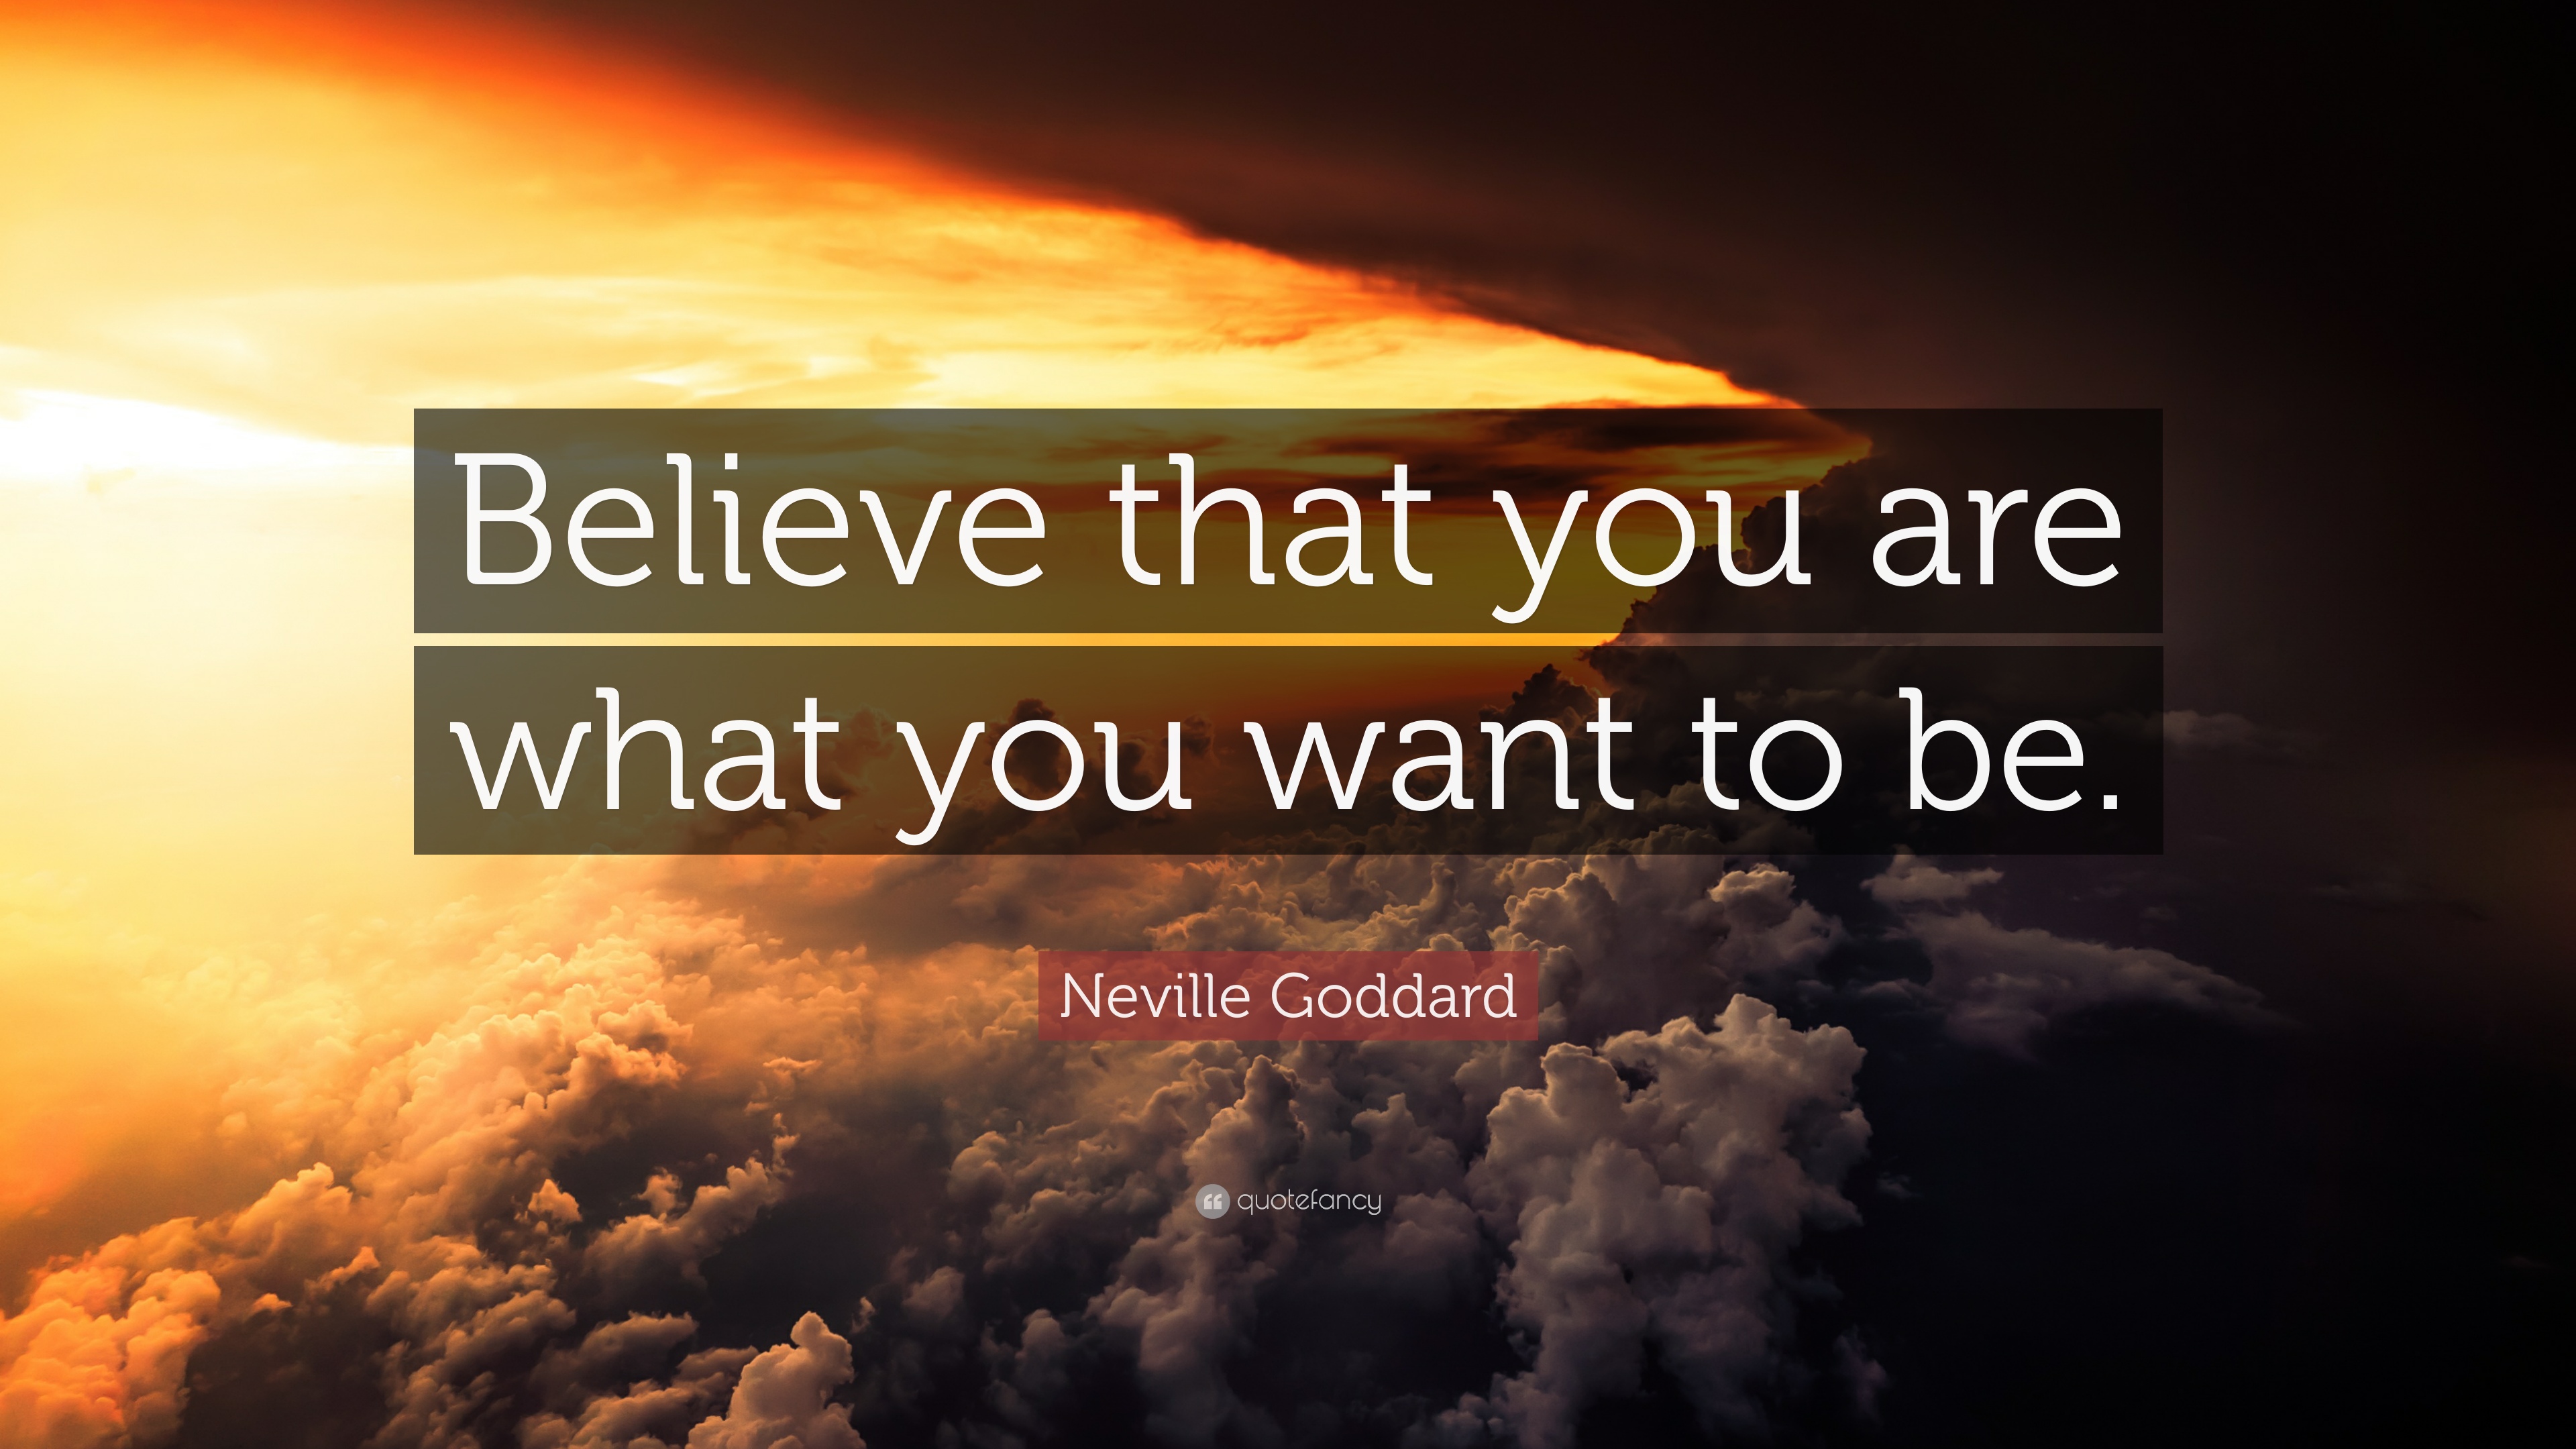 Believe you are what you want to be